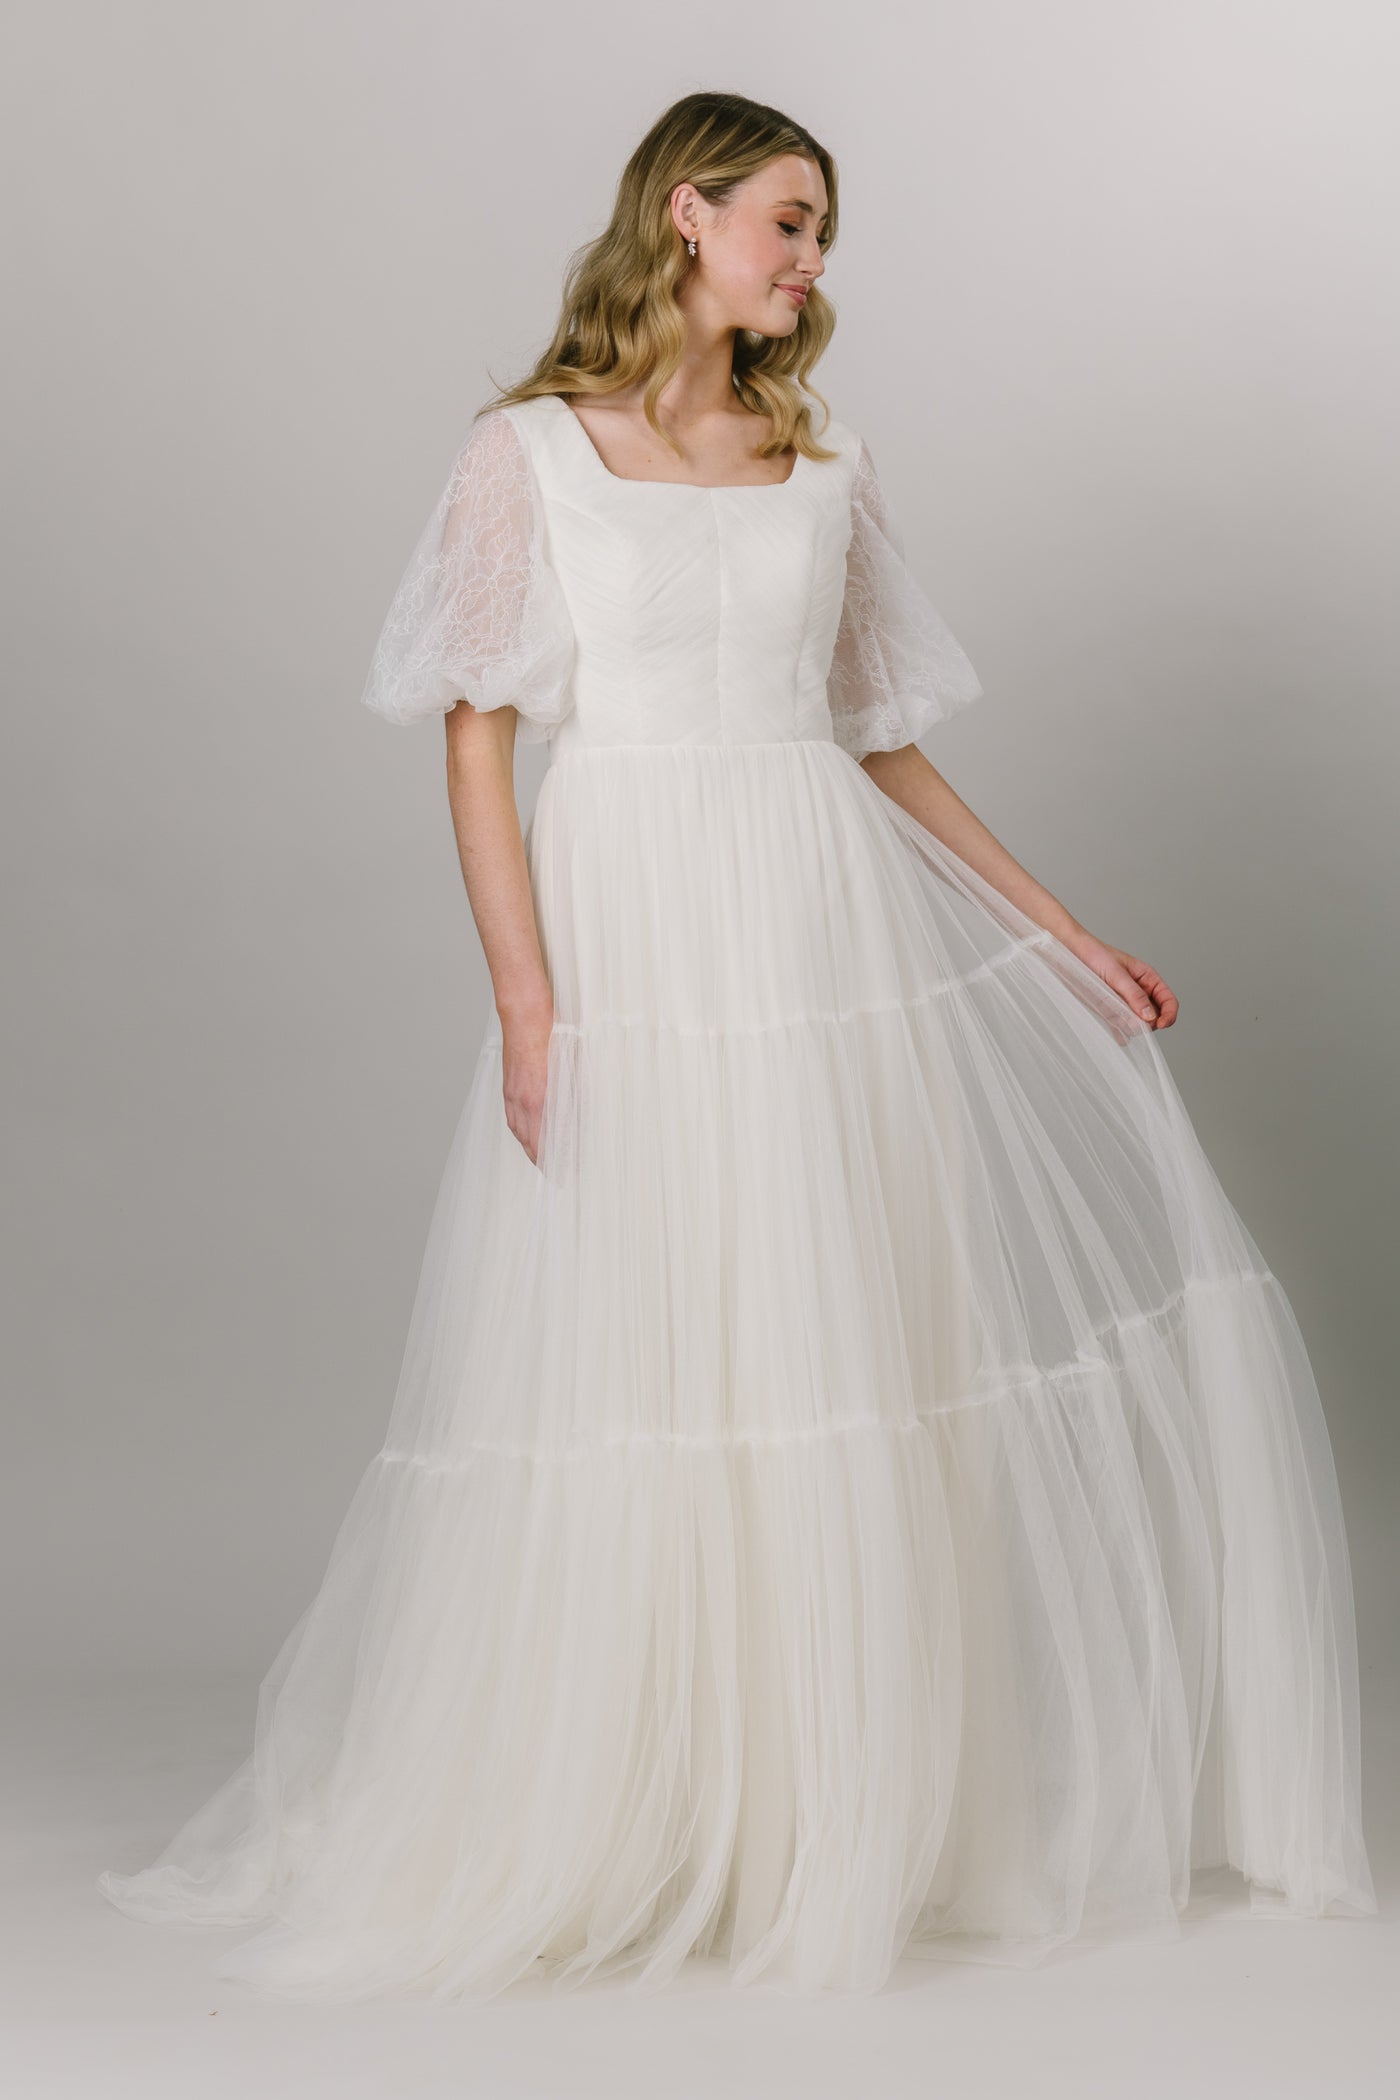 Alternate view of this beautiful english tulle wedding dress. This modest wedding wedding is perfect any whimsical bride. It has stunning lace puffed sleeves and a square neckline. It's a-line fit and tiered skirt.